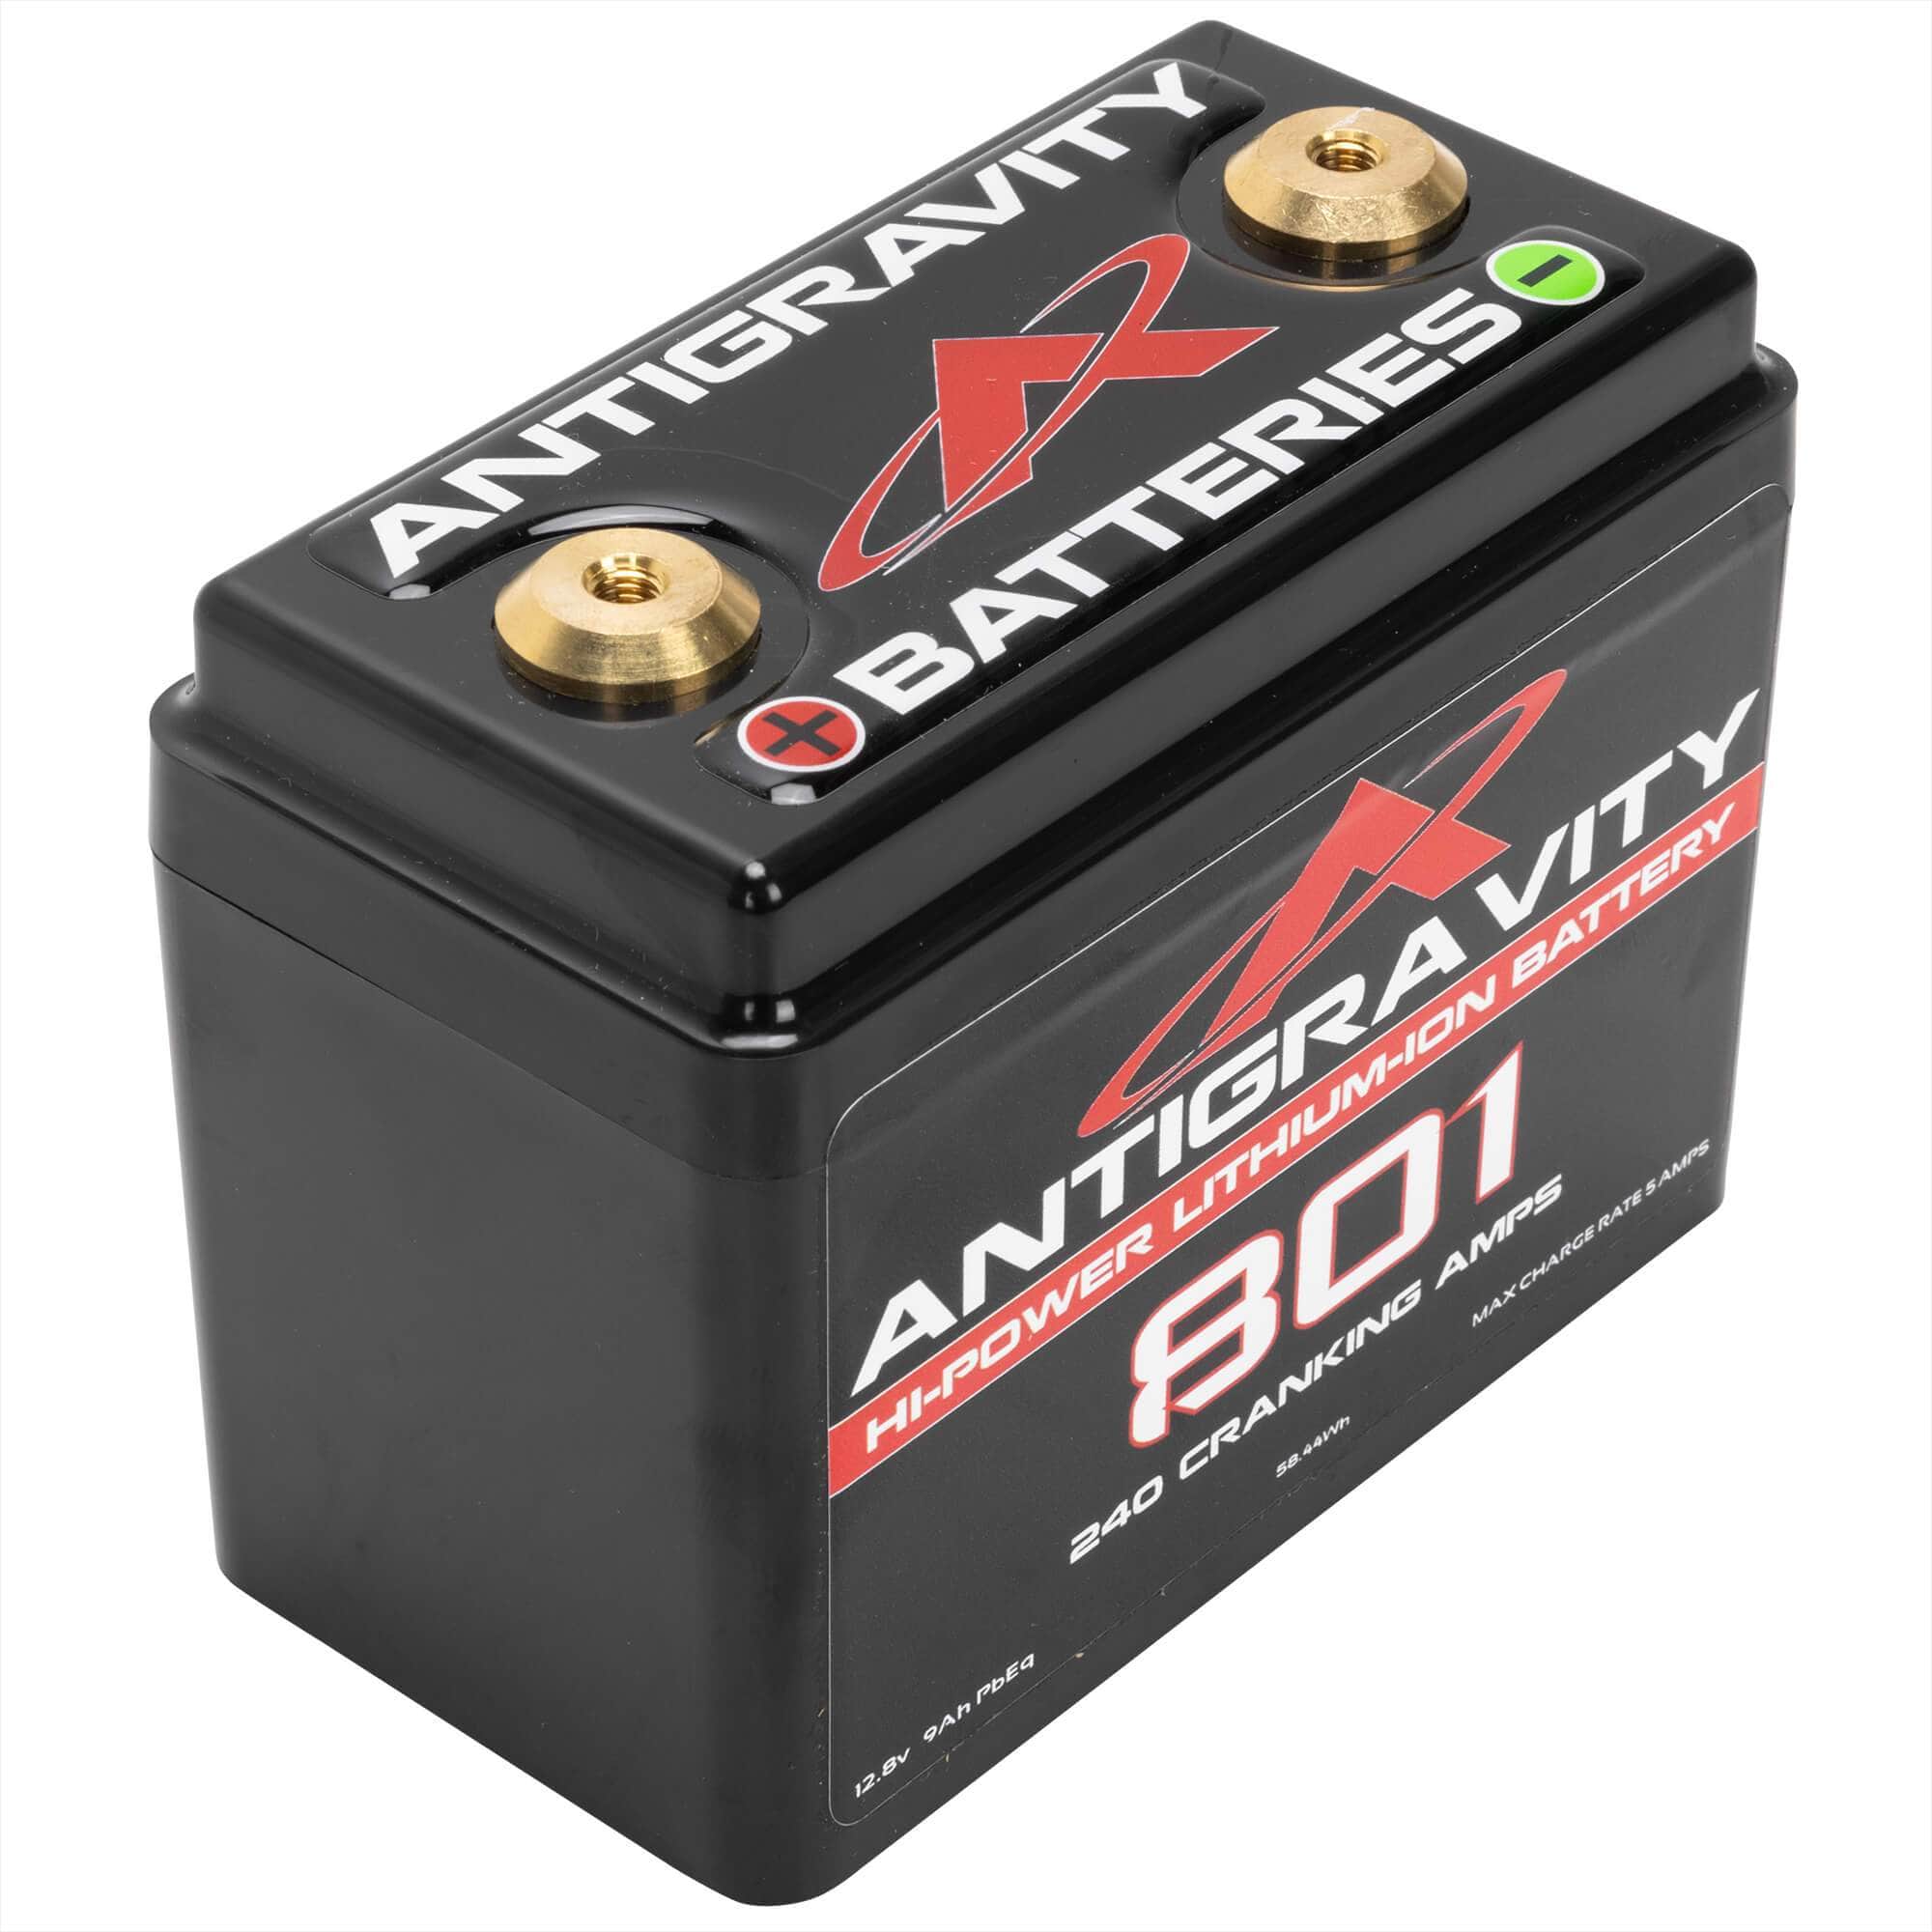 Antigravity Small Case 8-Cell Lithium-Ion Battery - AG-801